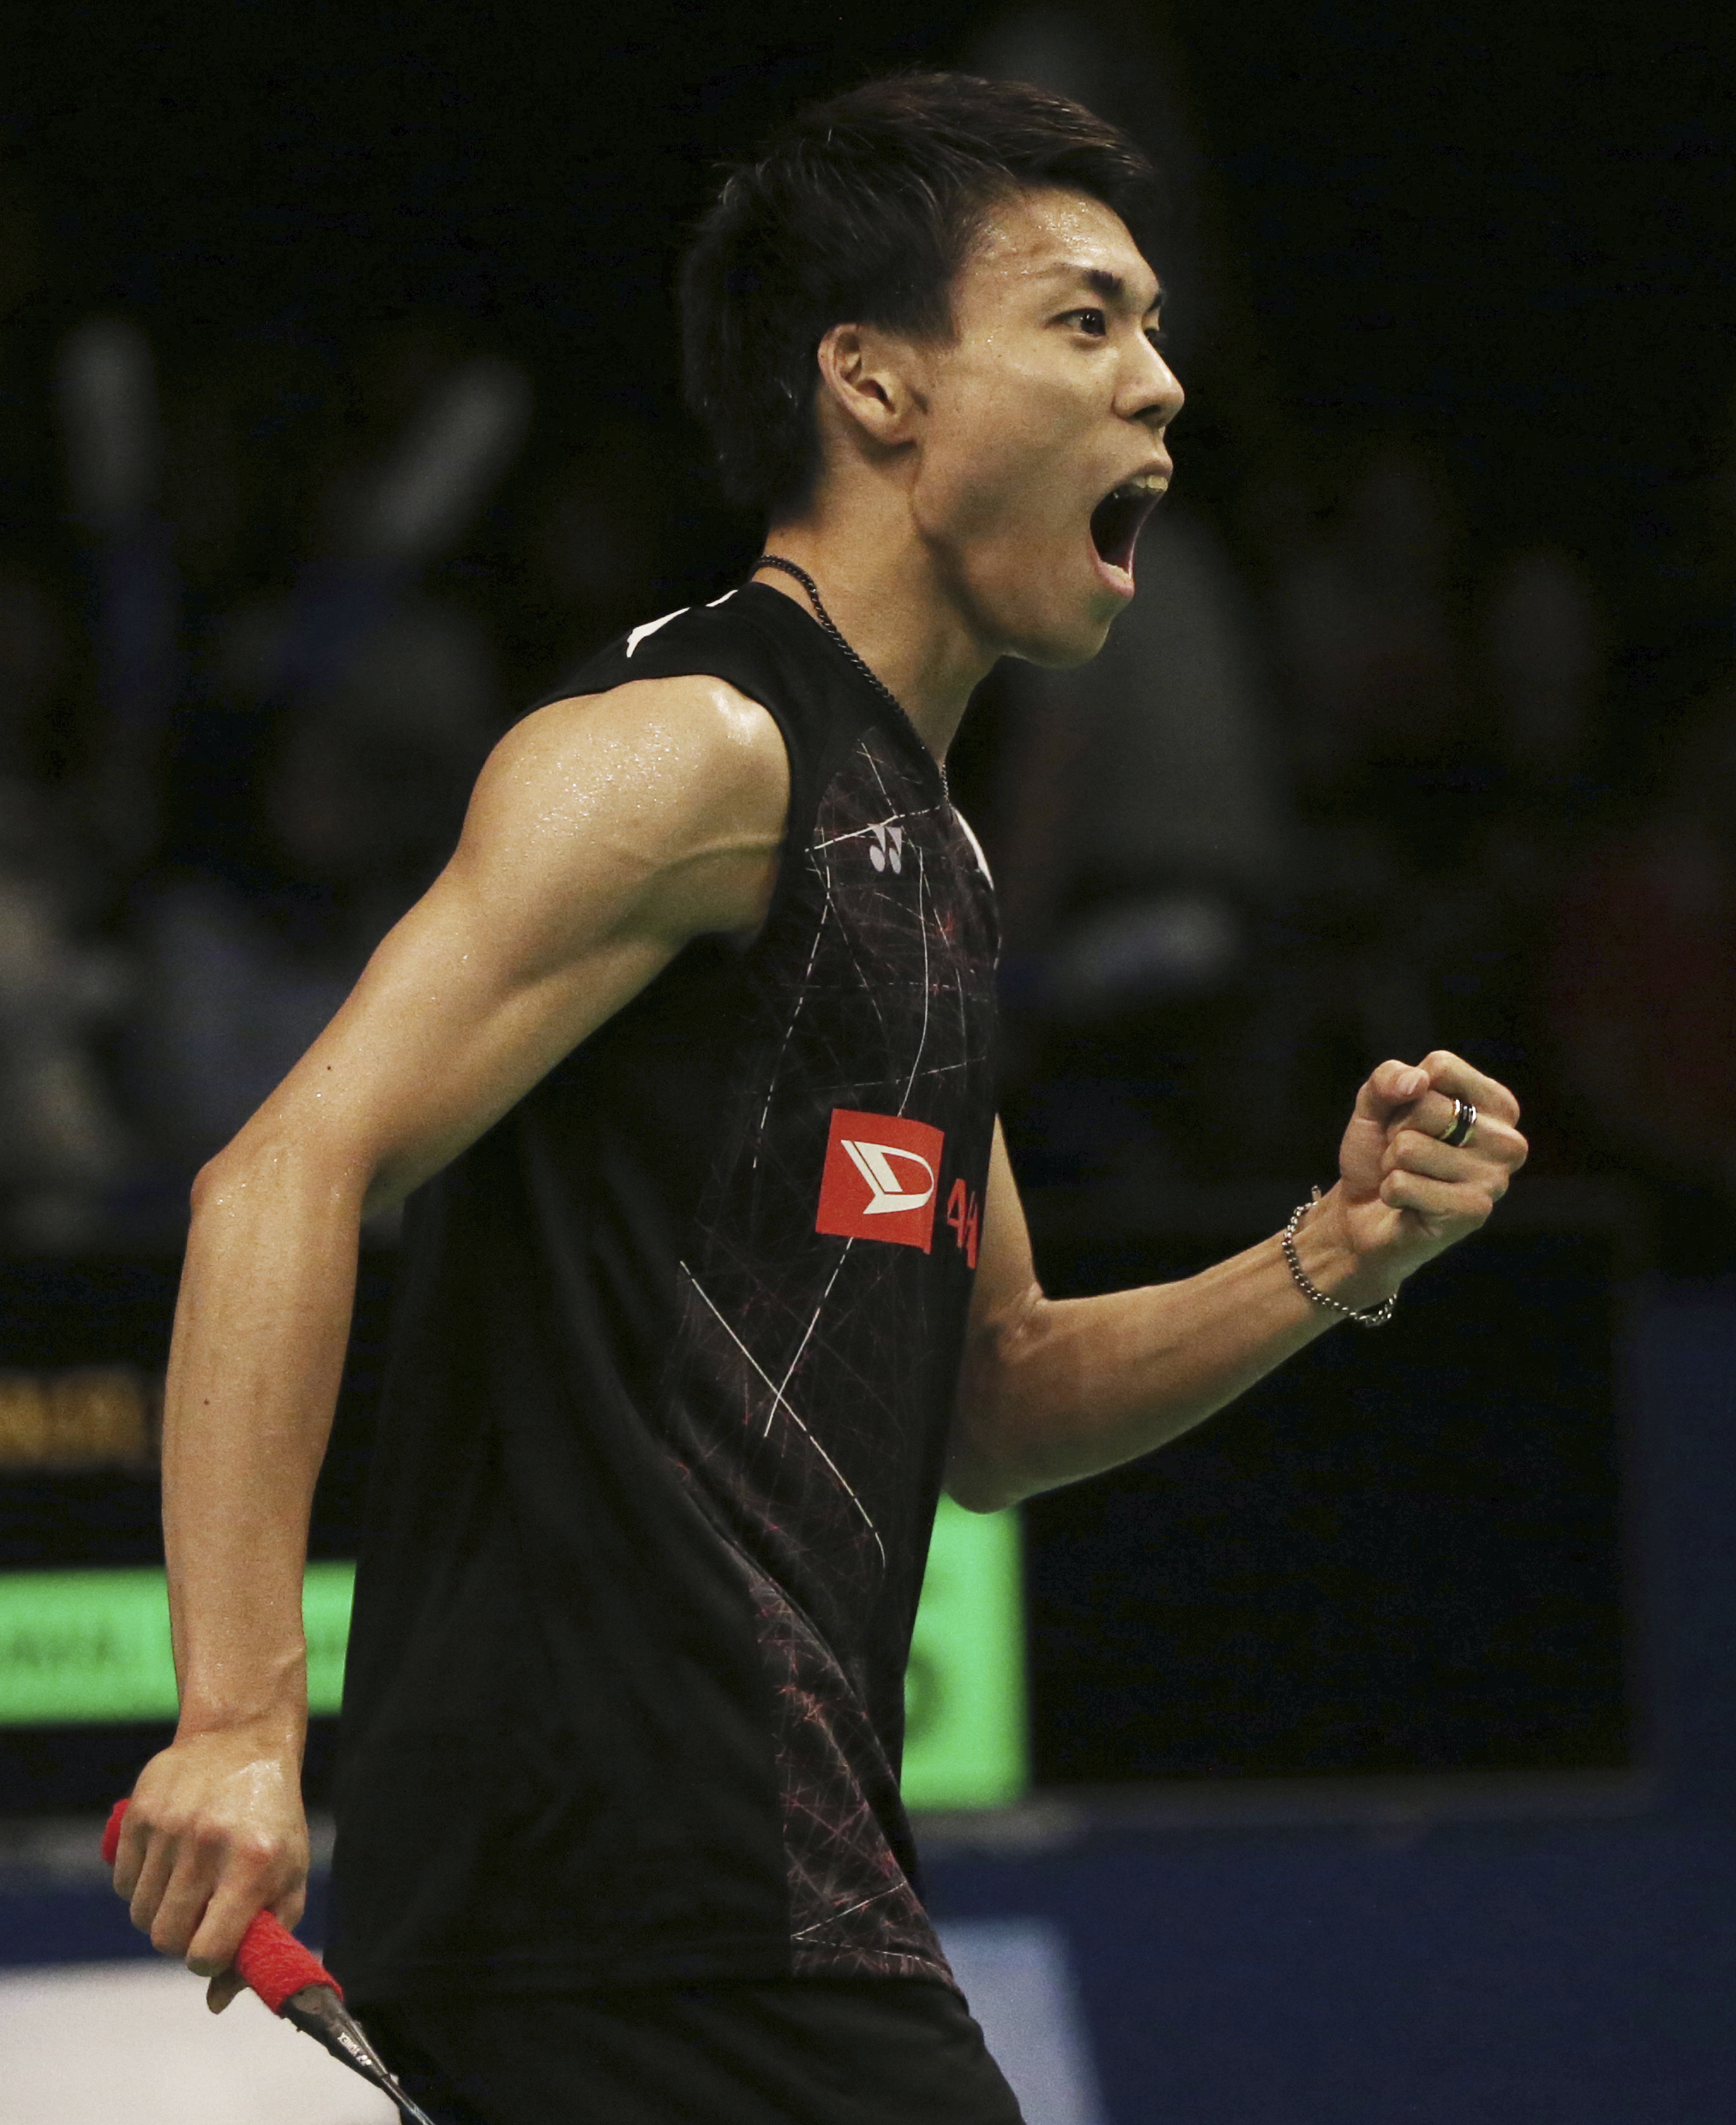 Japan's Kazumasa Sakai reacts after defeating Denmark's Emil Holst during the second round match of the Indonesia Open badminton championship in Jakarta, Indonesia, Thursday, June 15, 2017. (AP Photo/Dita Alangkara)